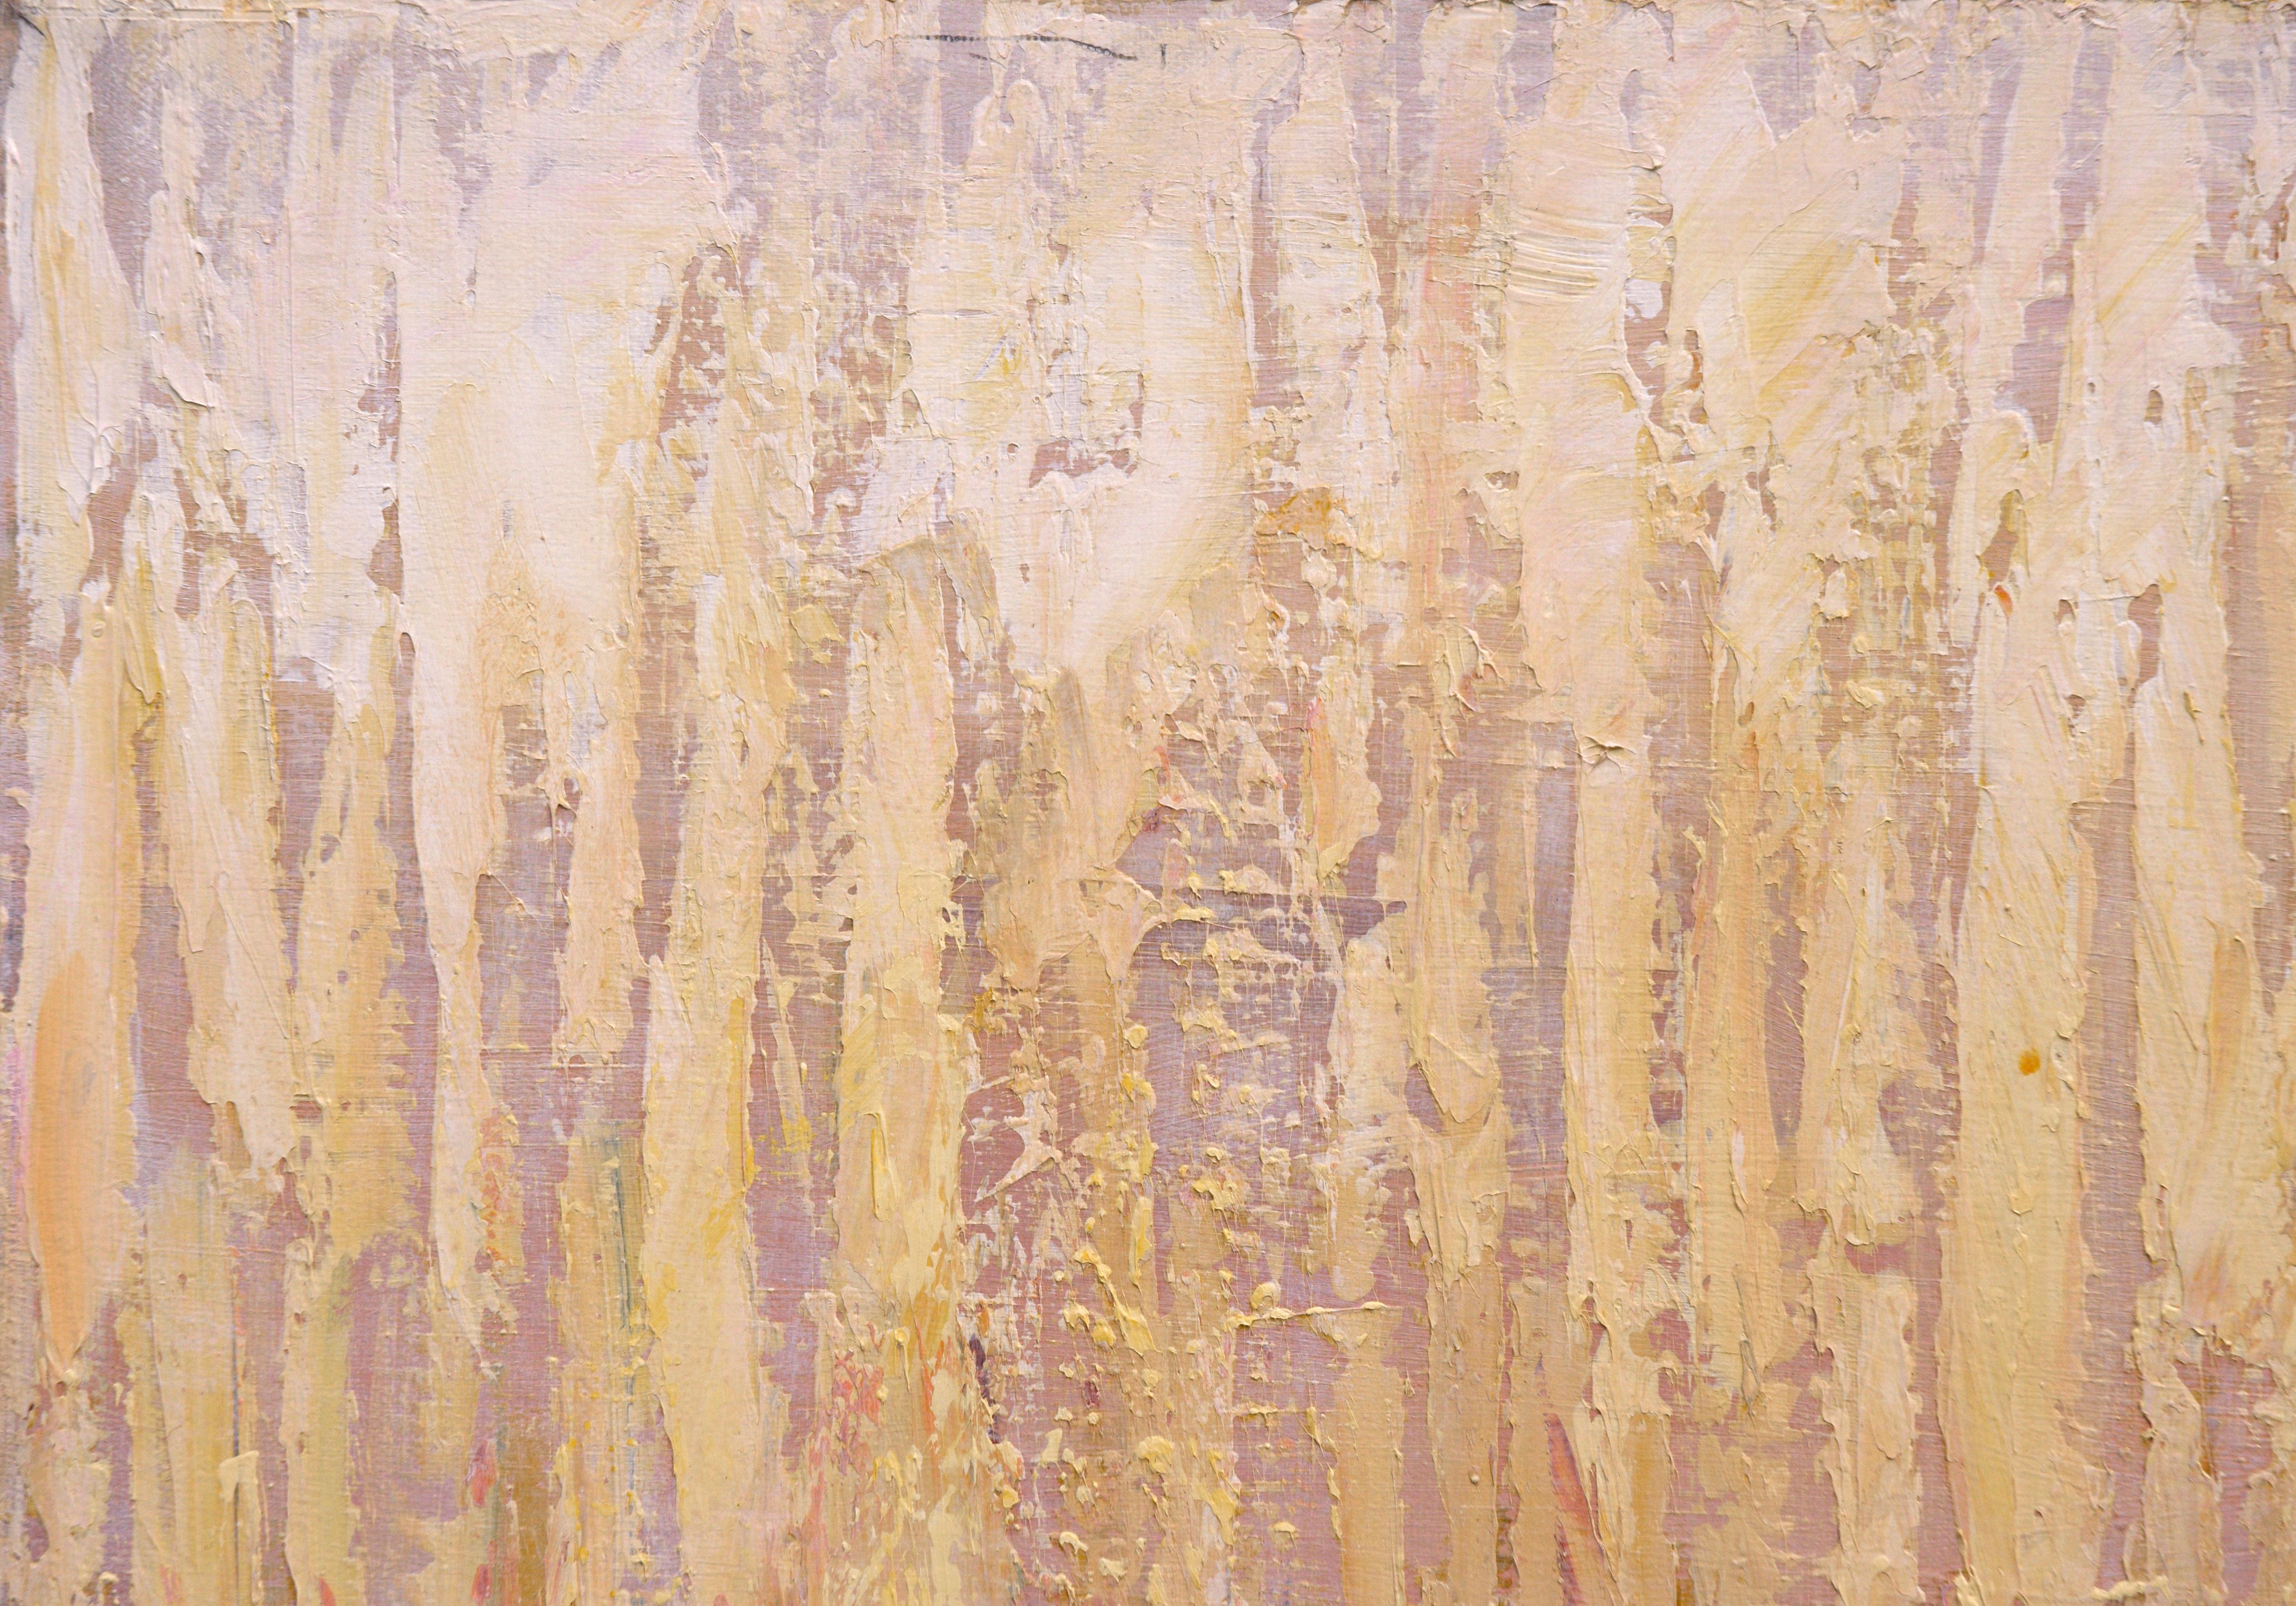 Abstract Field of Wheat - Painting by Richard W. Patt